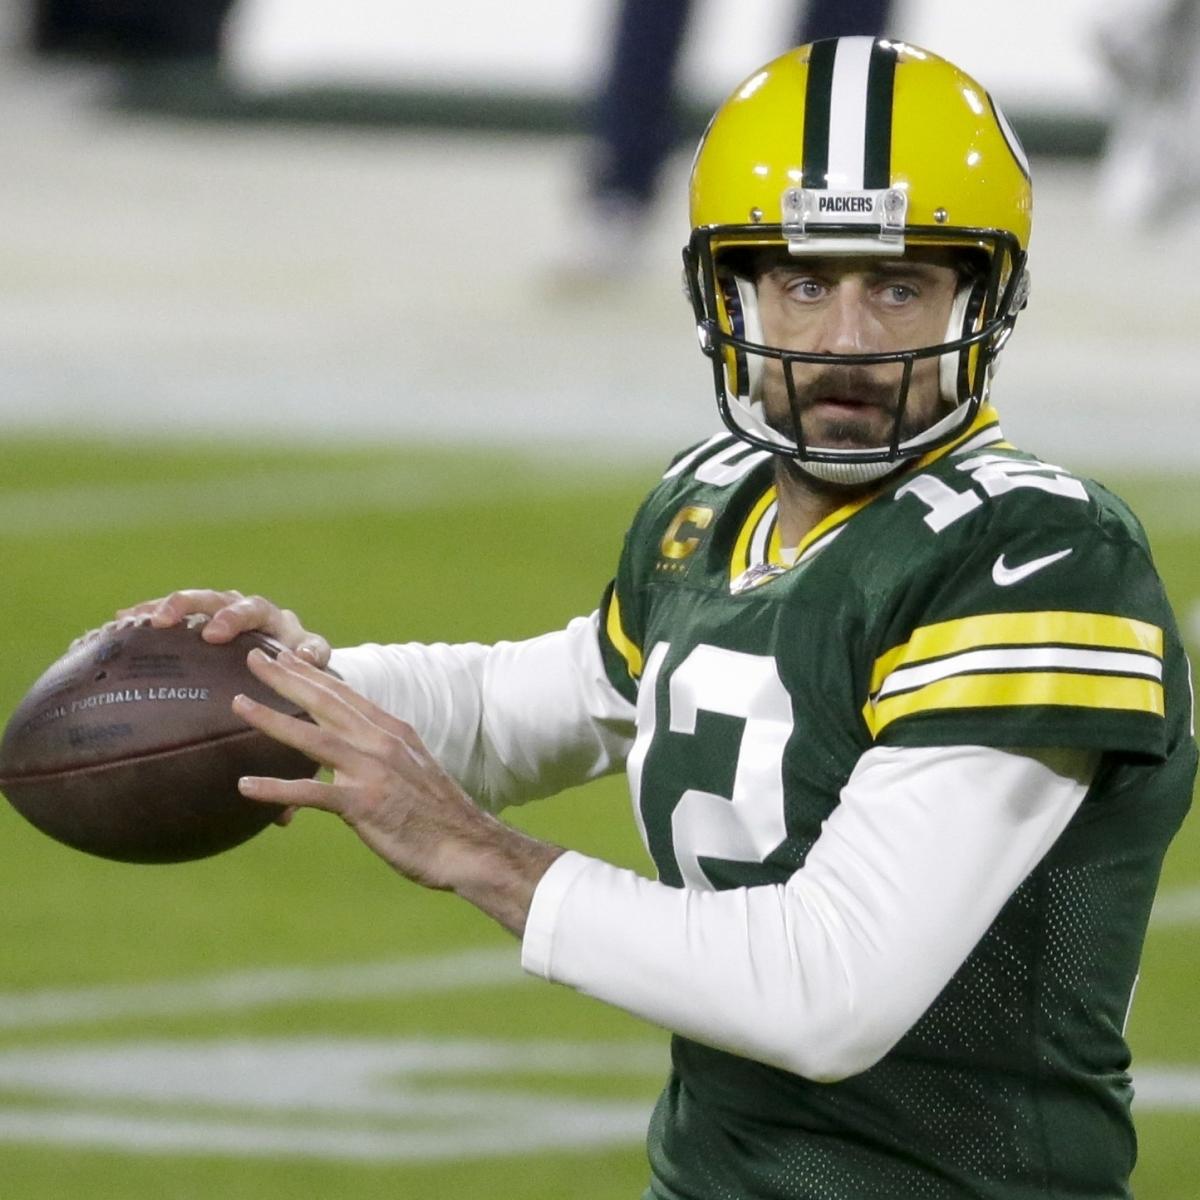 Packers’ Aaron Rodgers Turns into 11th QB in NFL Historical previous with 50,000 Passing Yards